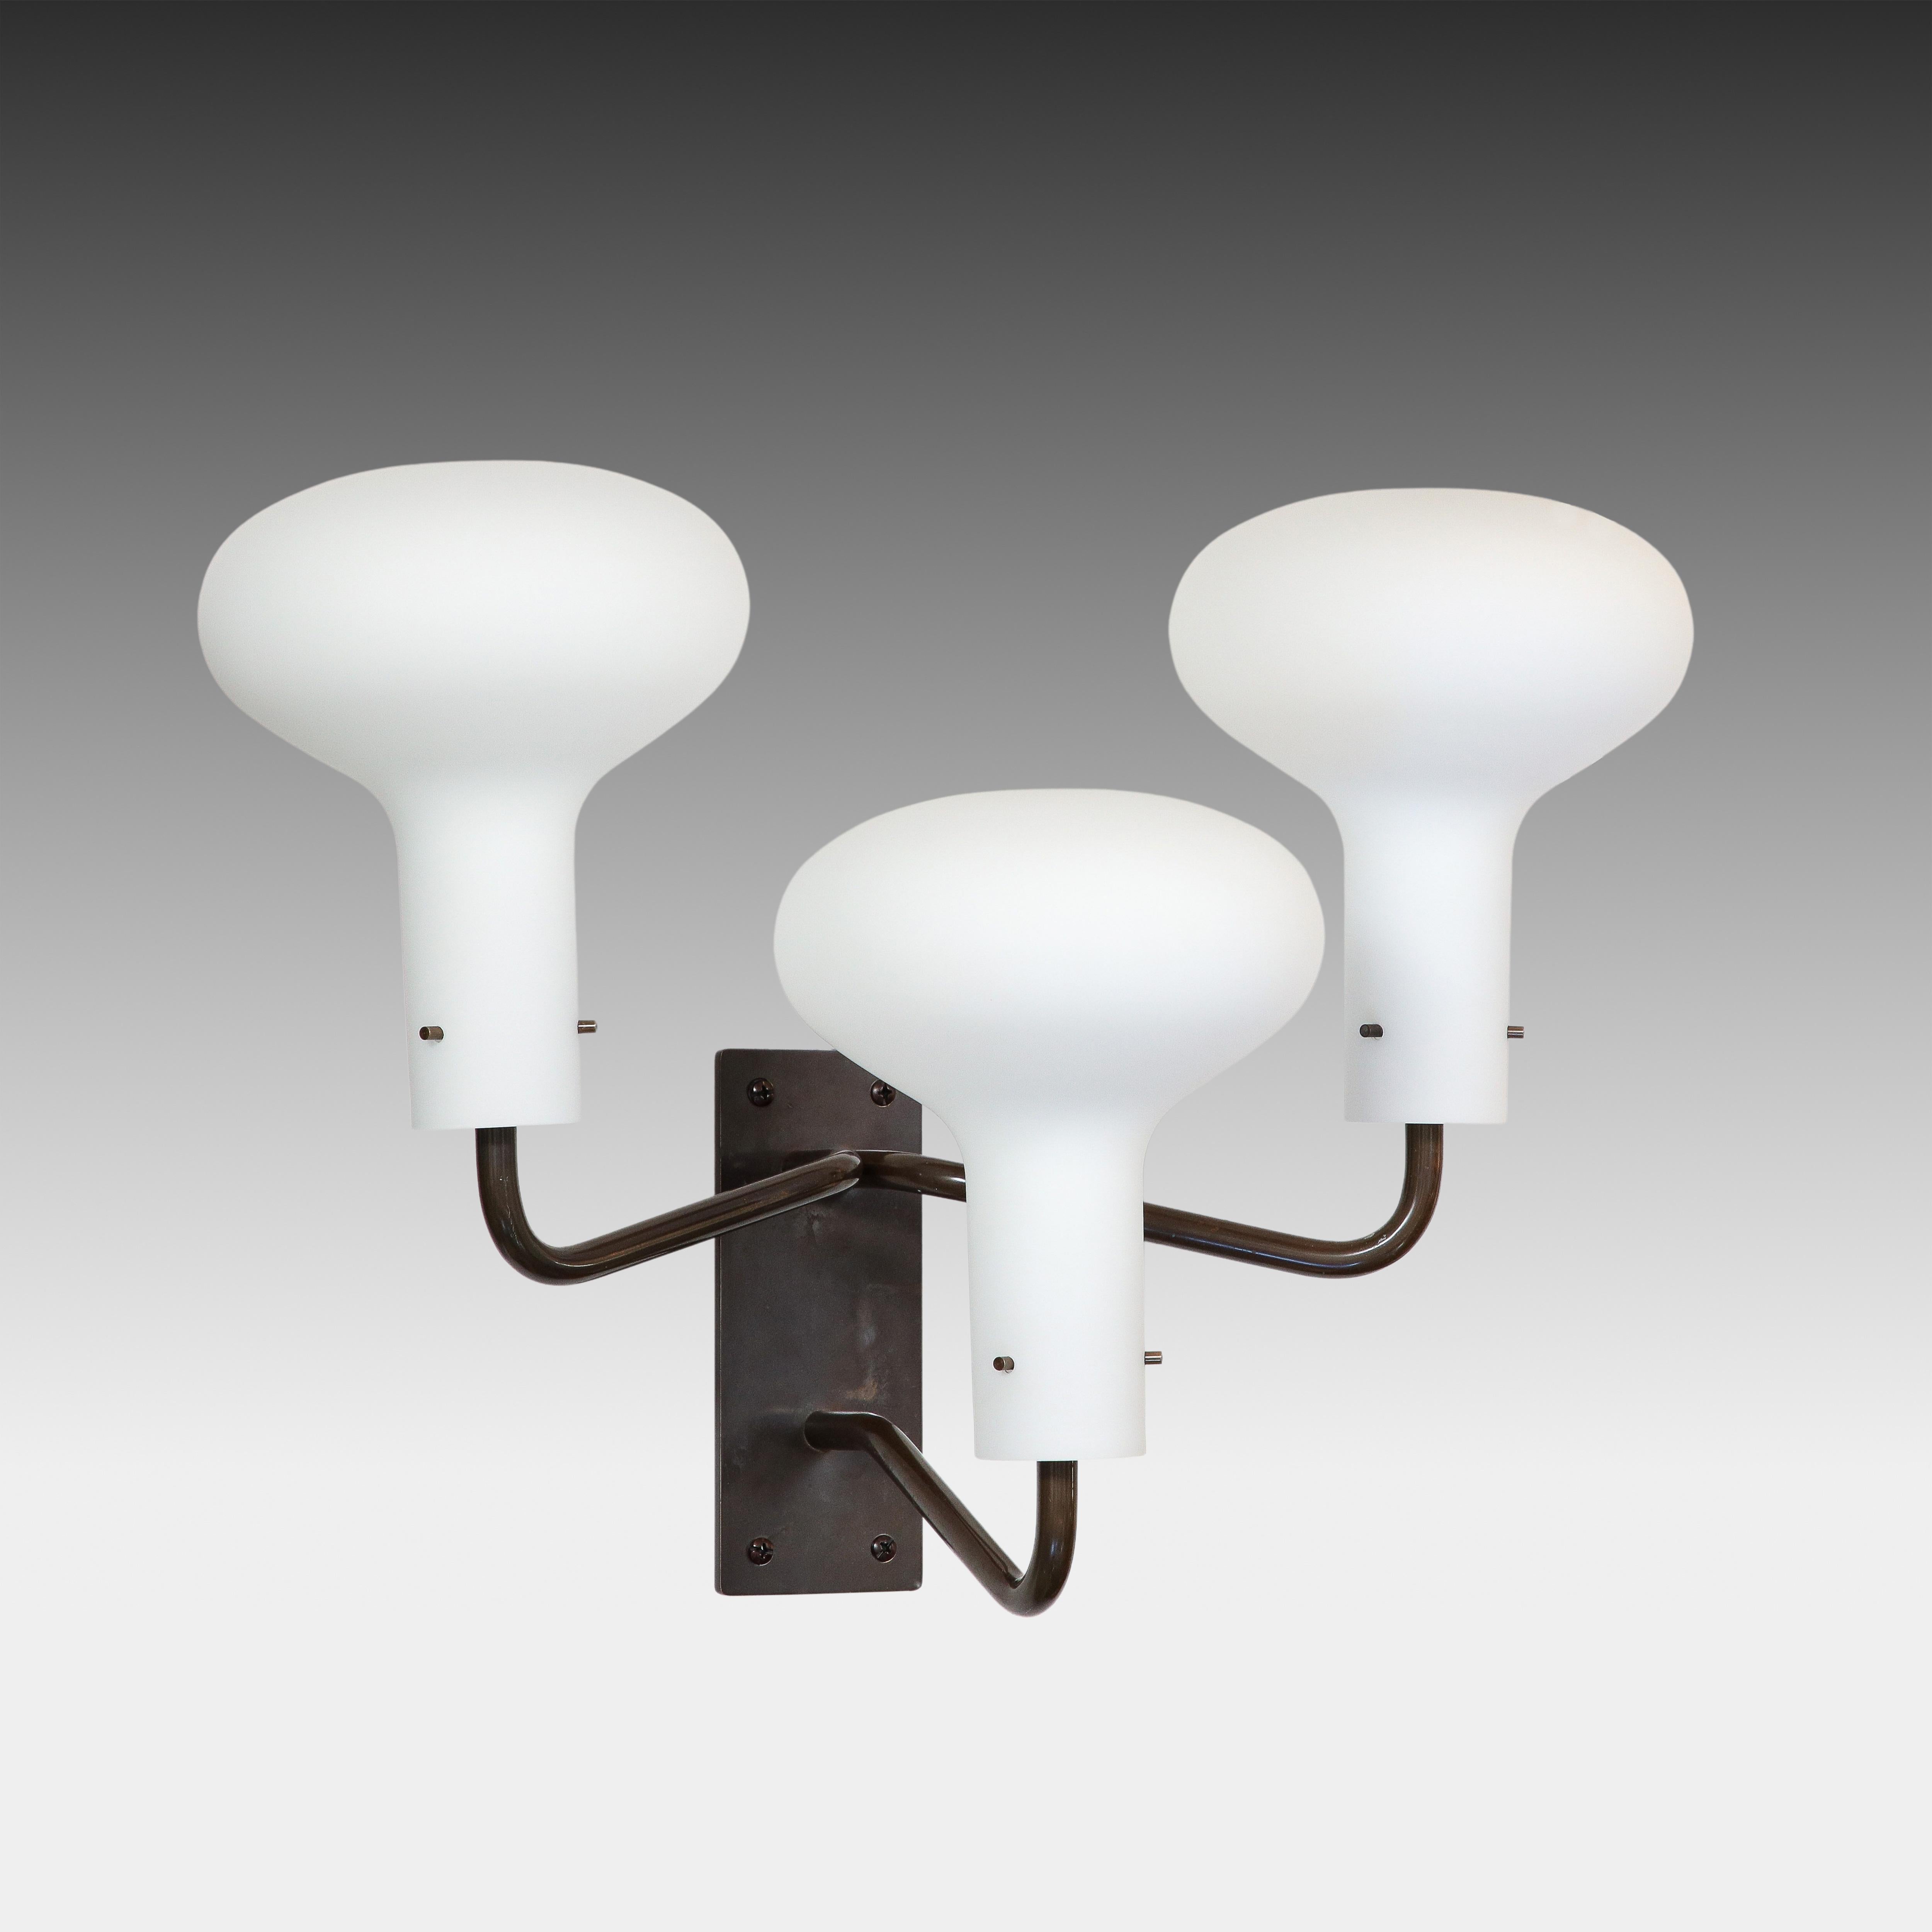 Ignazio Gardella for Azucena Pair of Three Arm Wall Lights Model LP12, 1950s For Sale 3